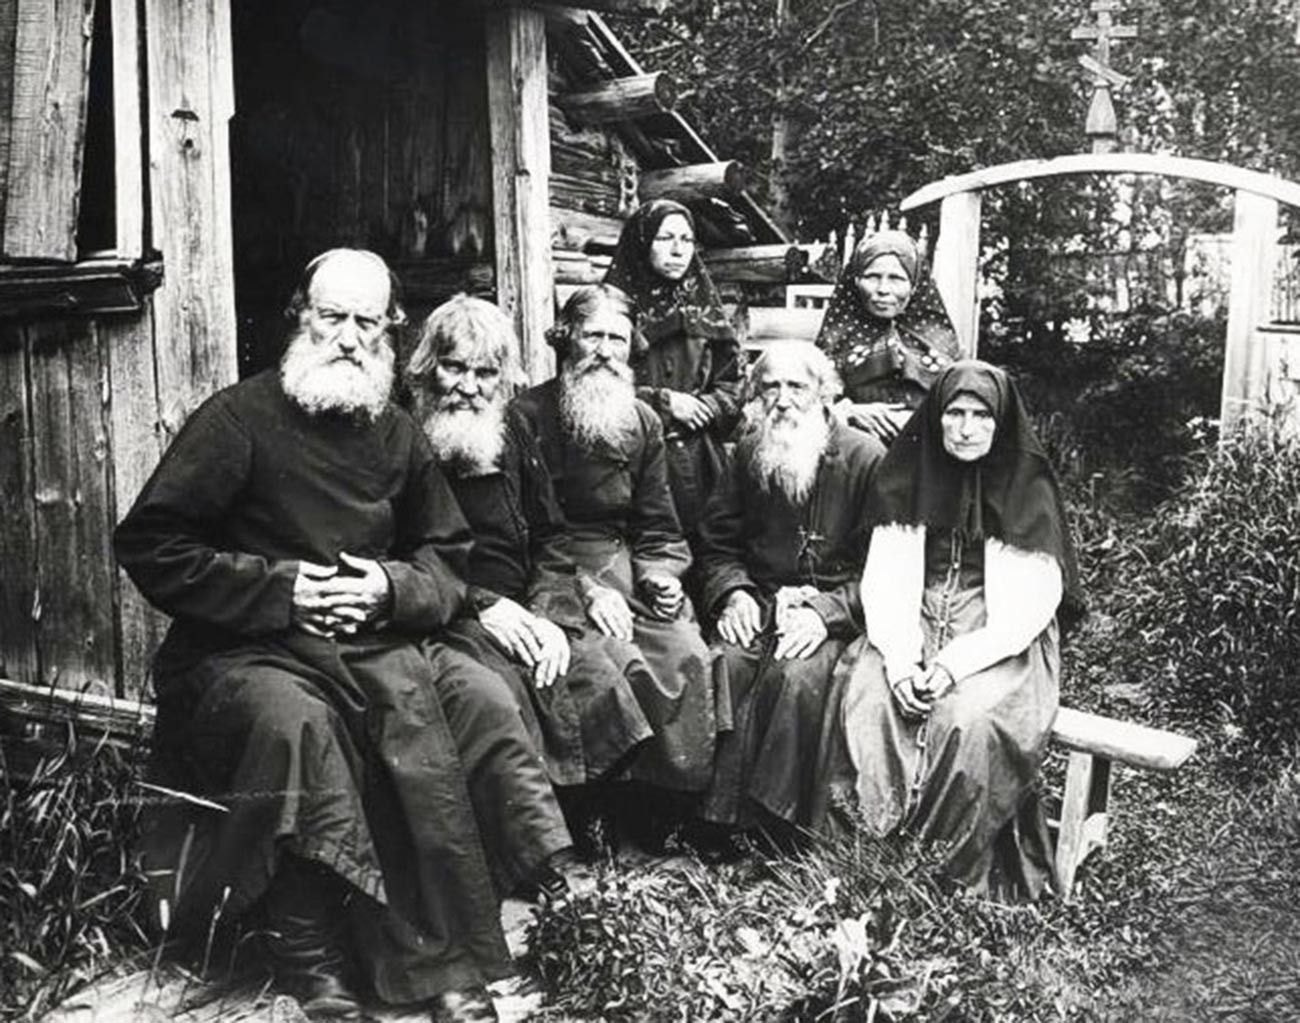 A group of Old Believers in the 19th century